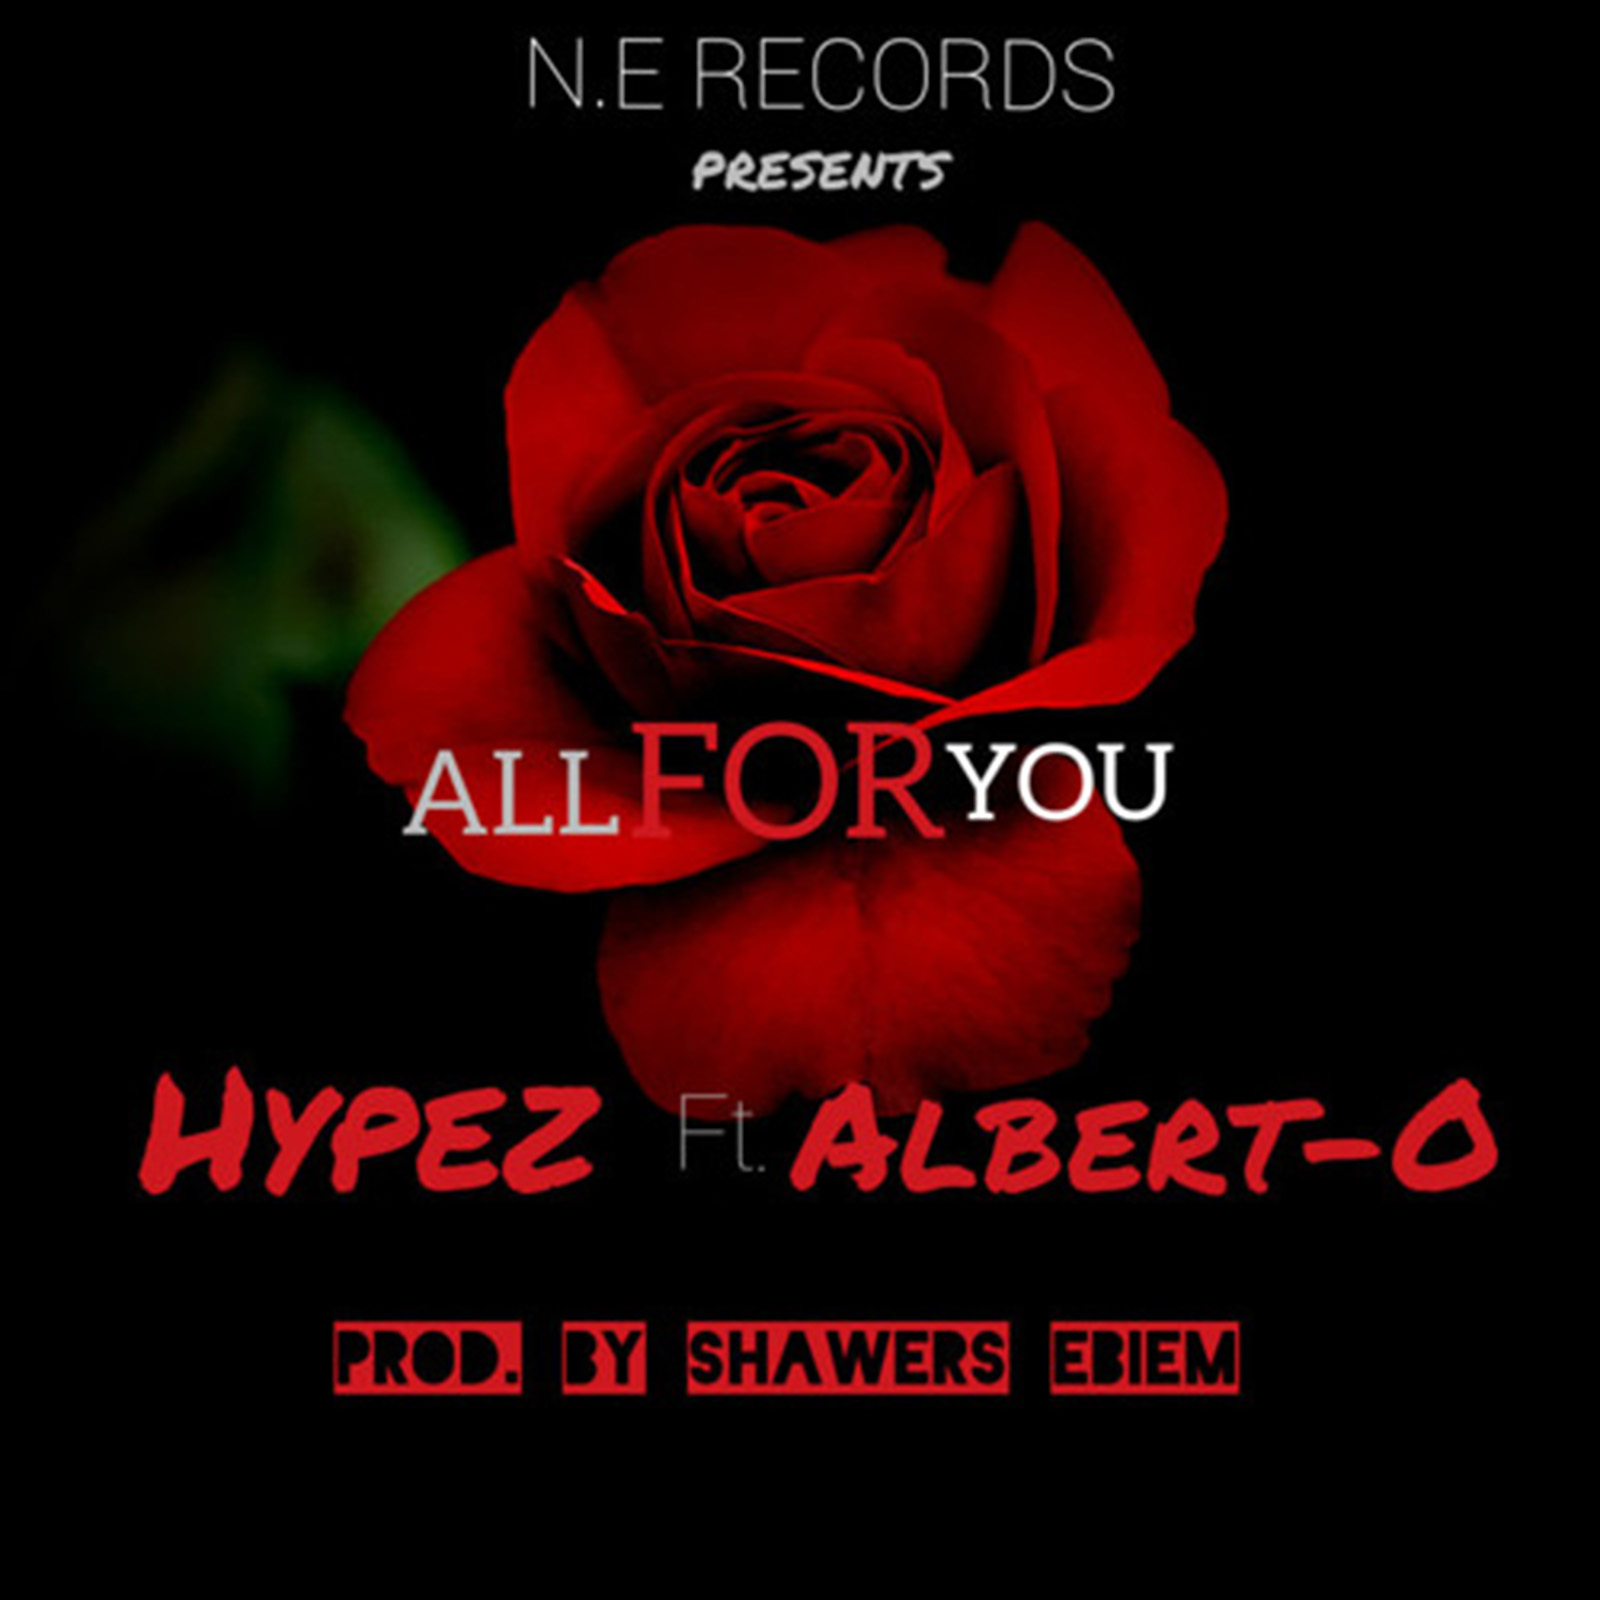 All For You by Hypez feat. Albert-O